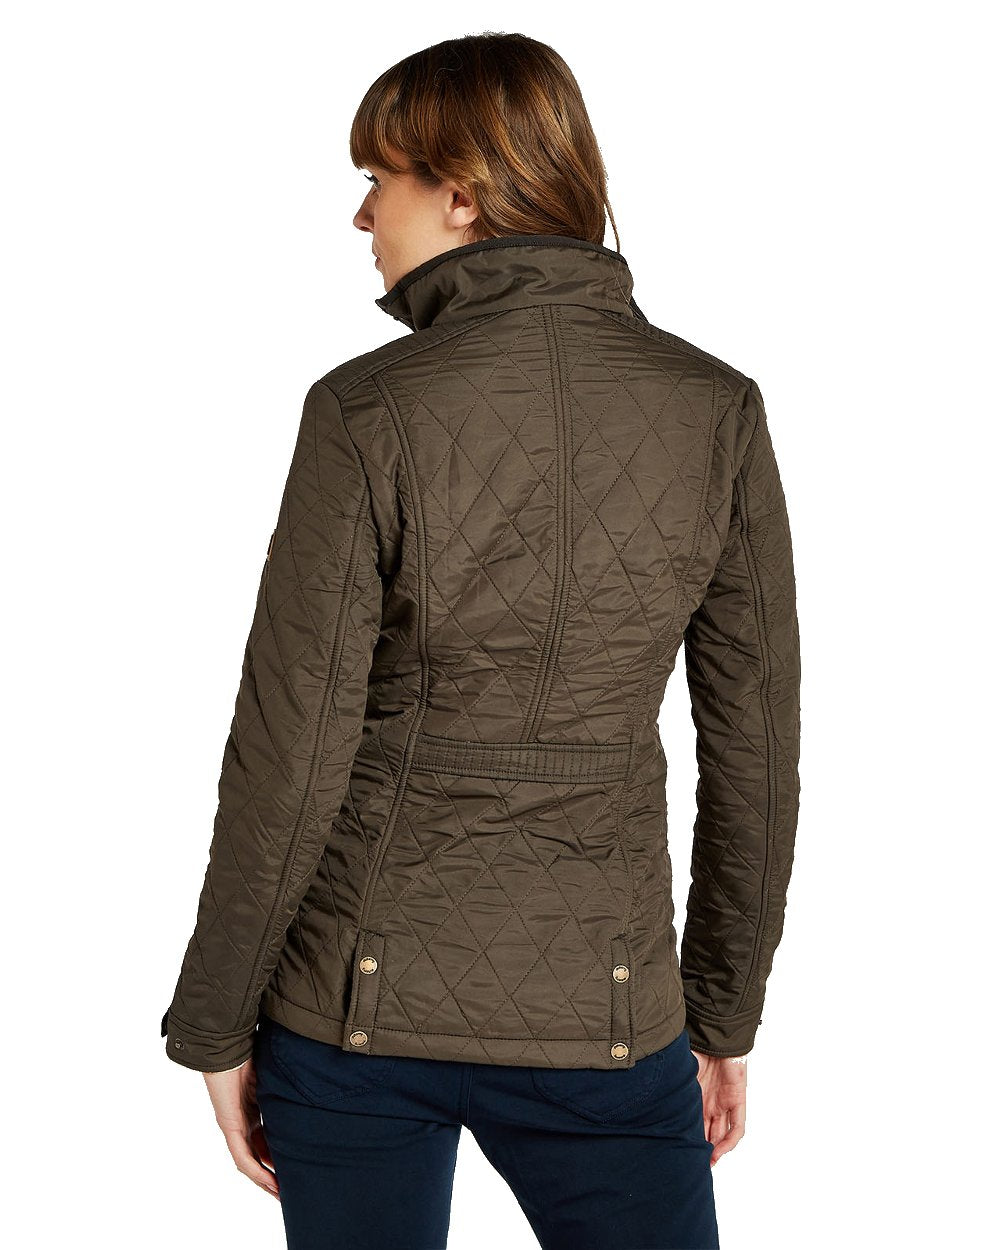 Dubarry Camlodge Quilted Jacket in Olive 